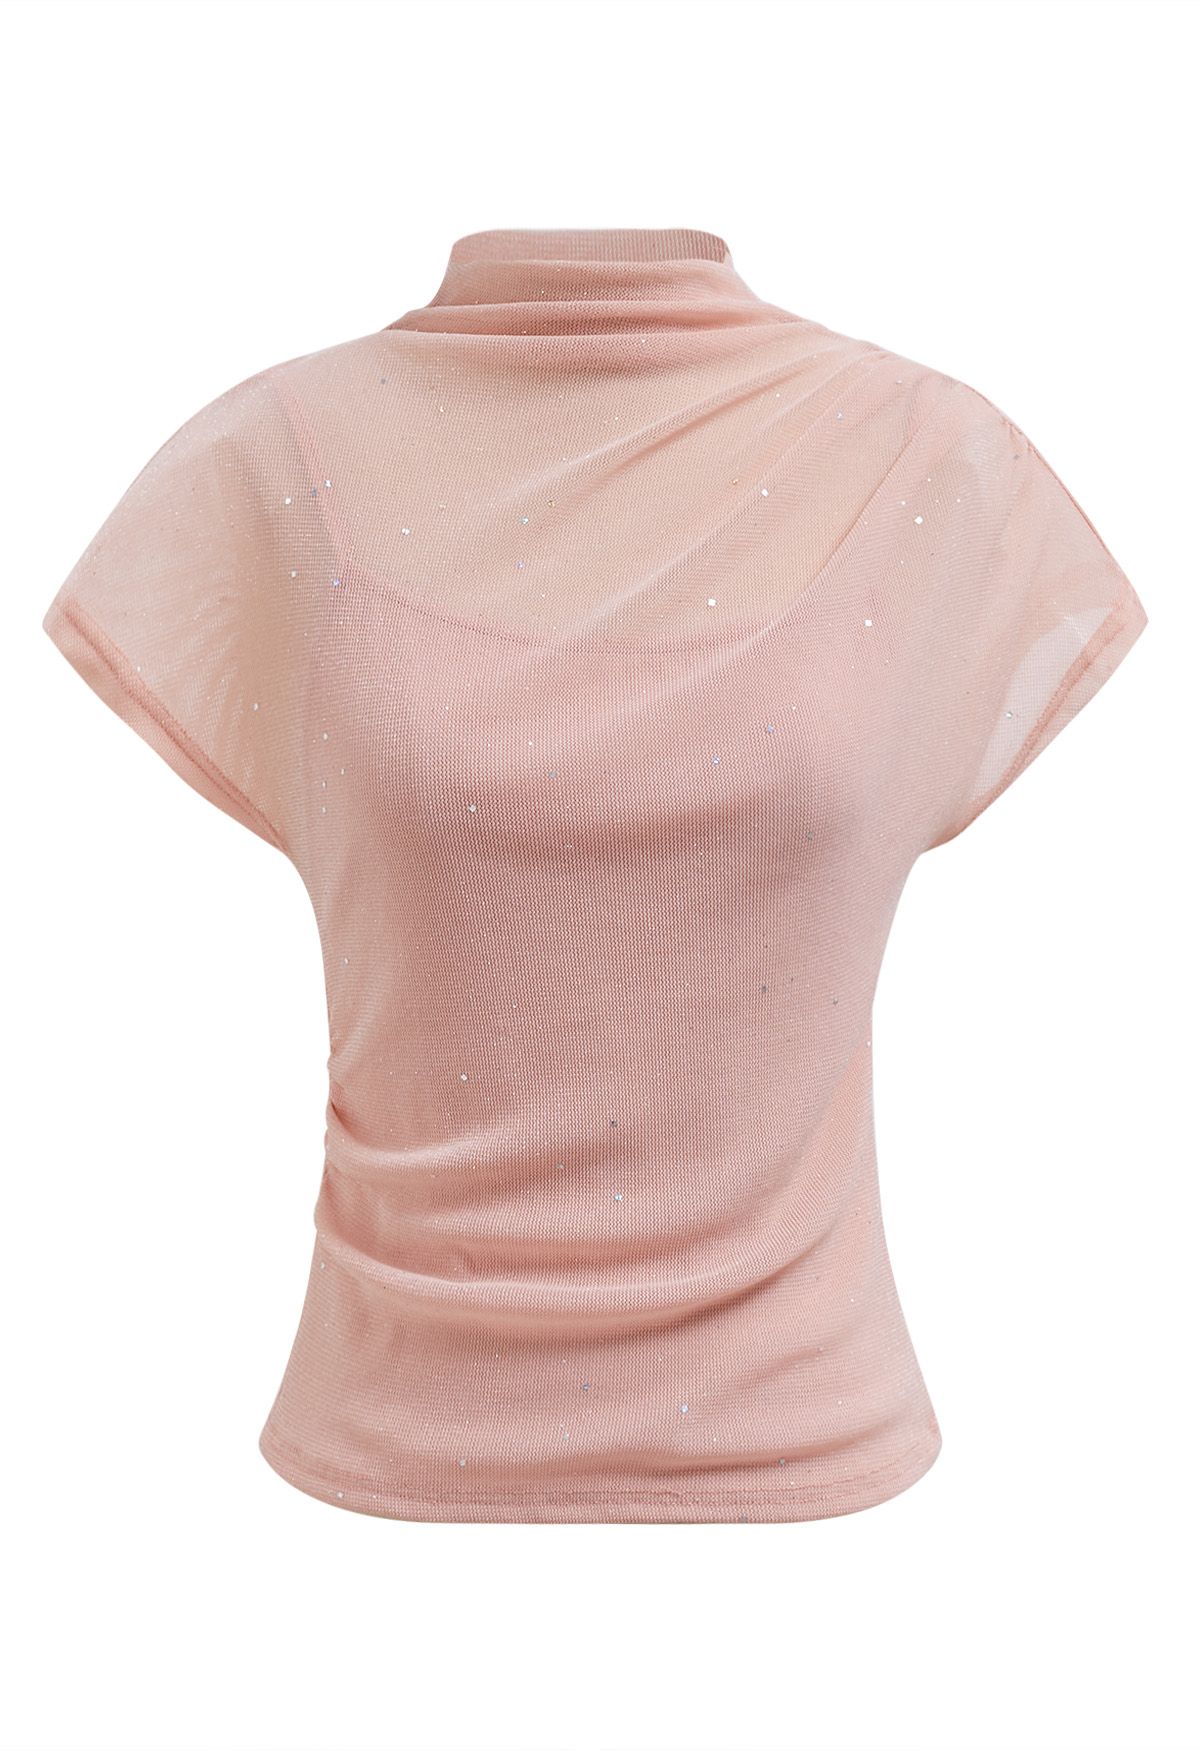 Shimmery Mock Neck Mesh Top in Pink